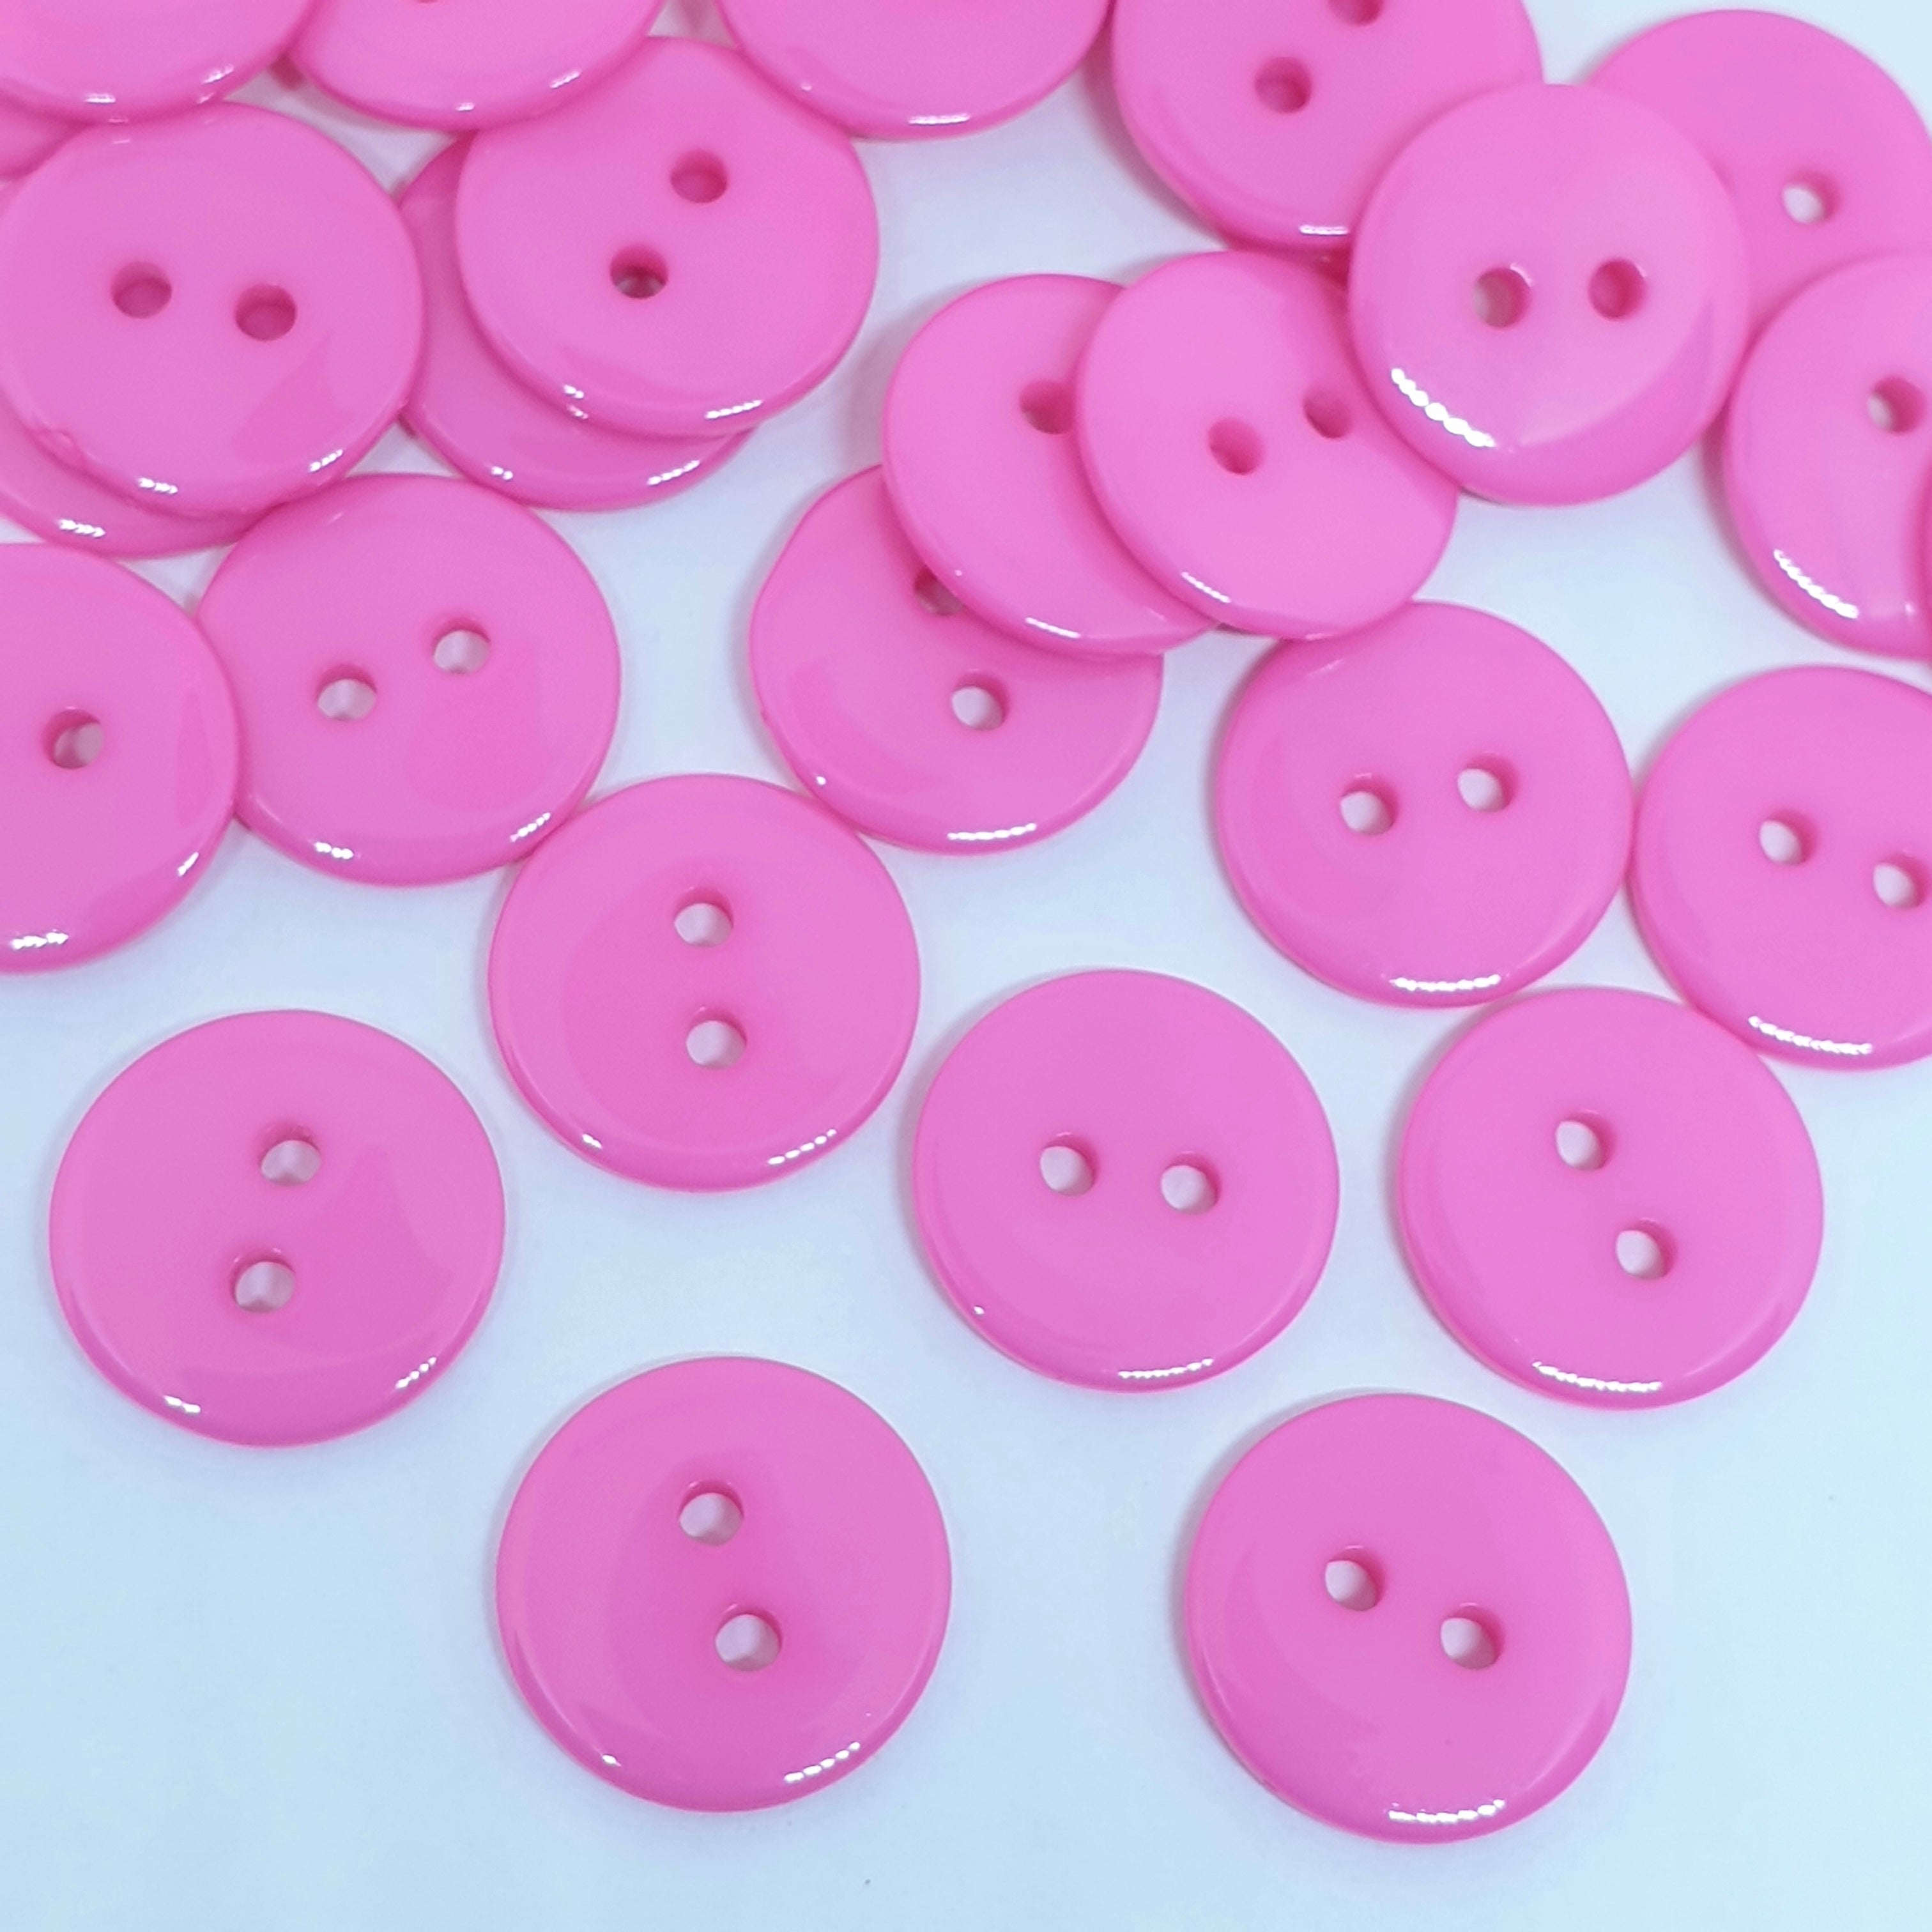 MajorCrafts 72pcs 15mm Rose Pink 2 Holes Round Resin Sewing Buttons